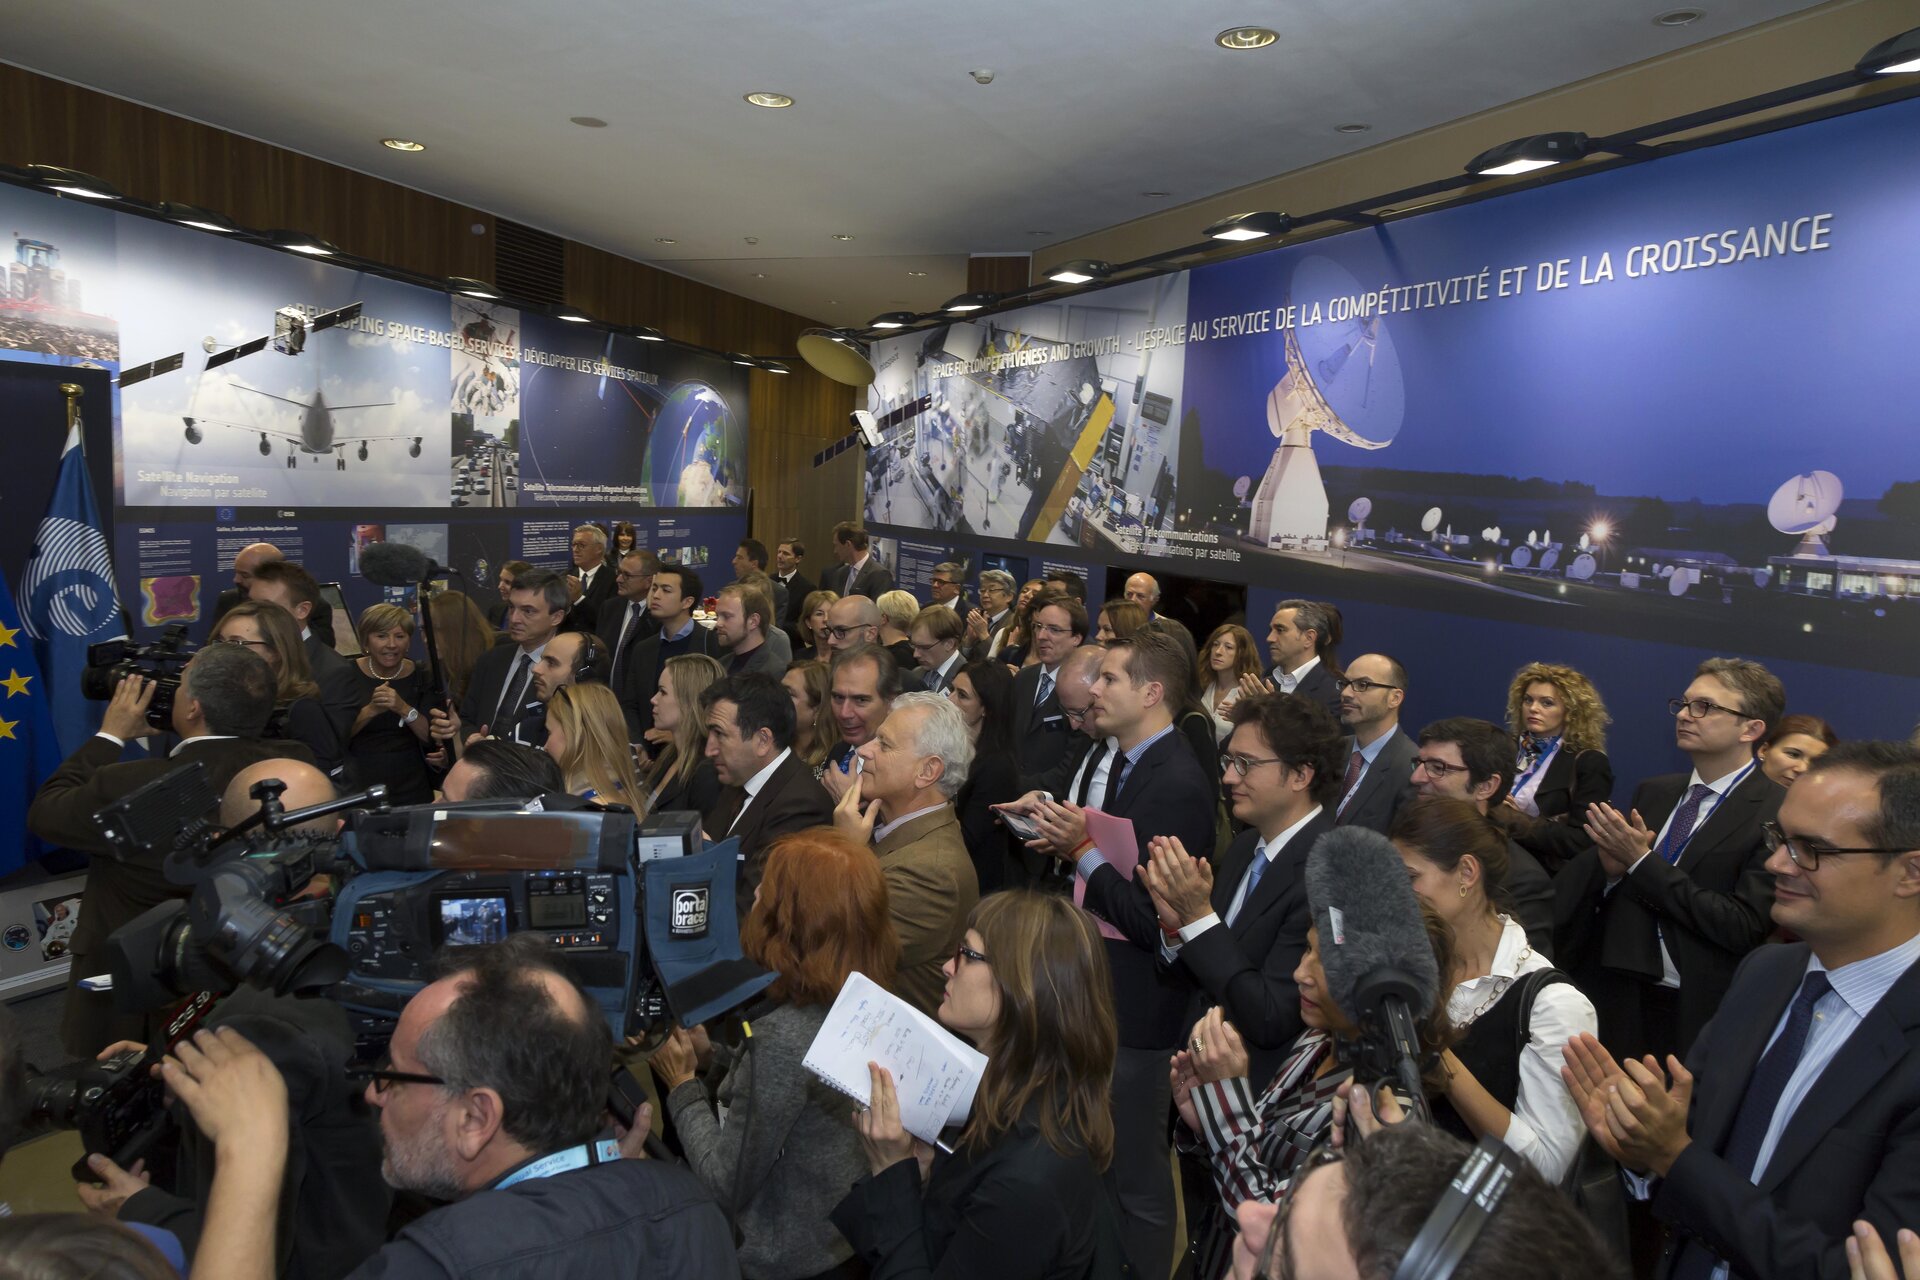 Inauguration of the ‘Space For Our Future’ exhibition